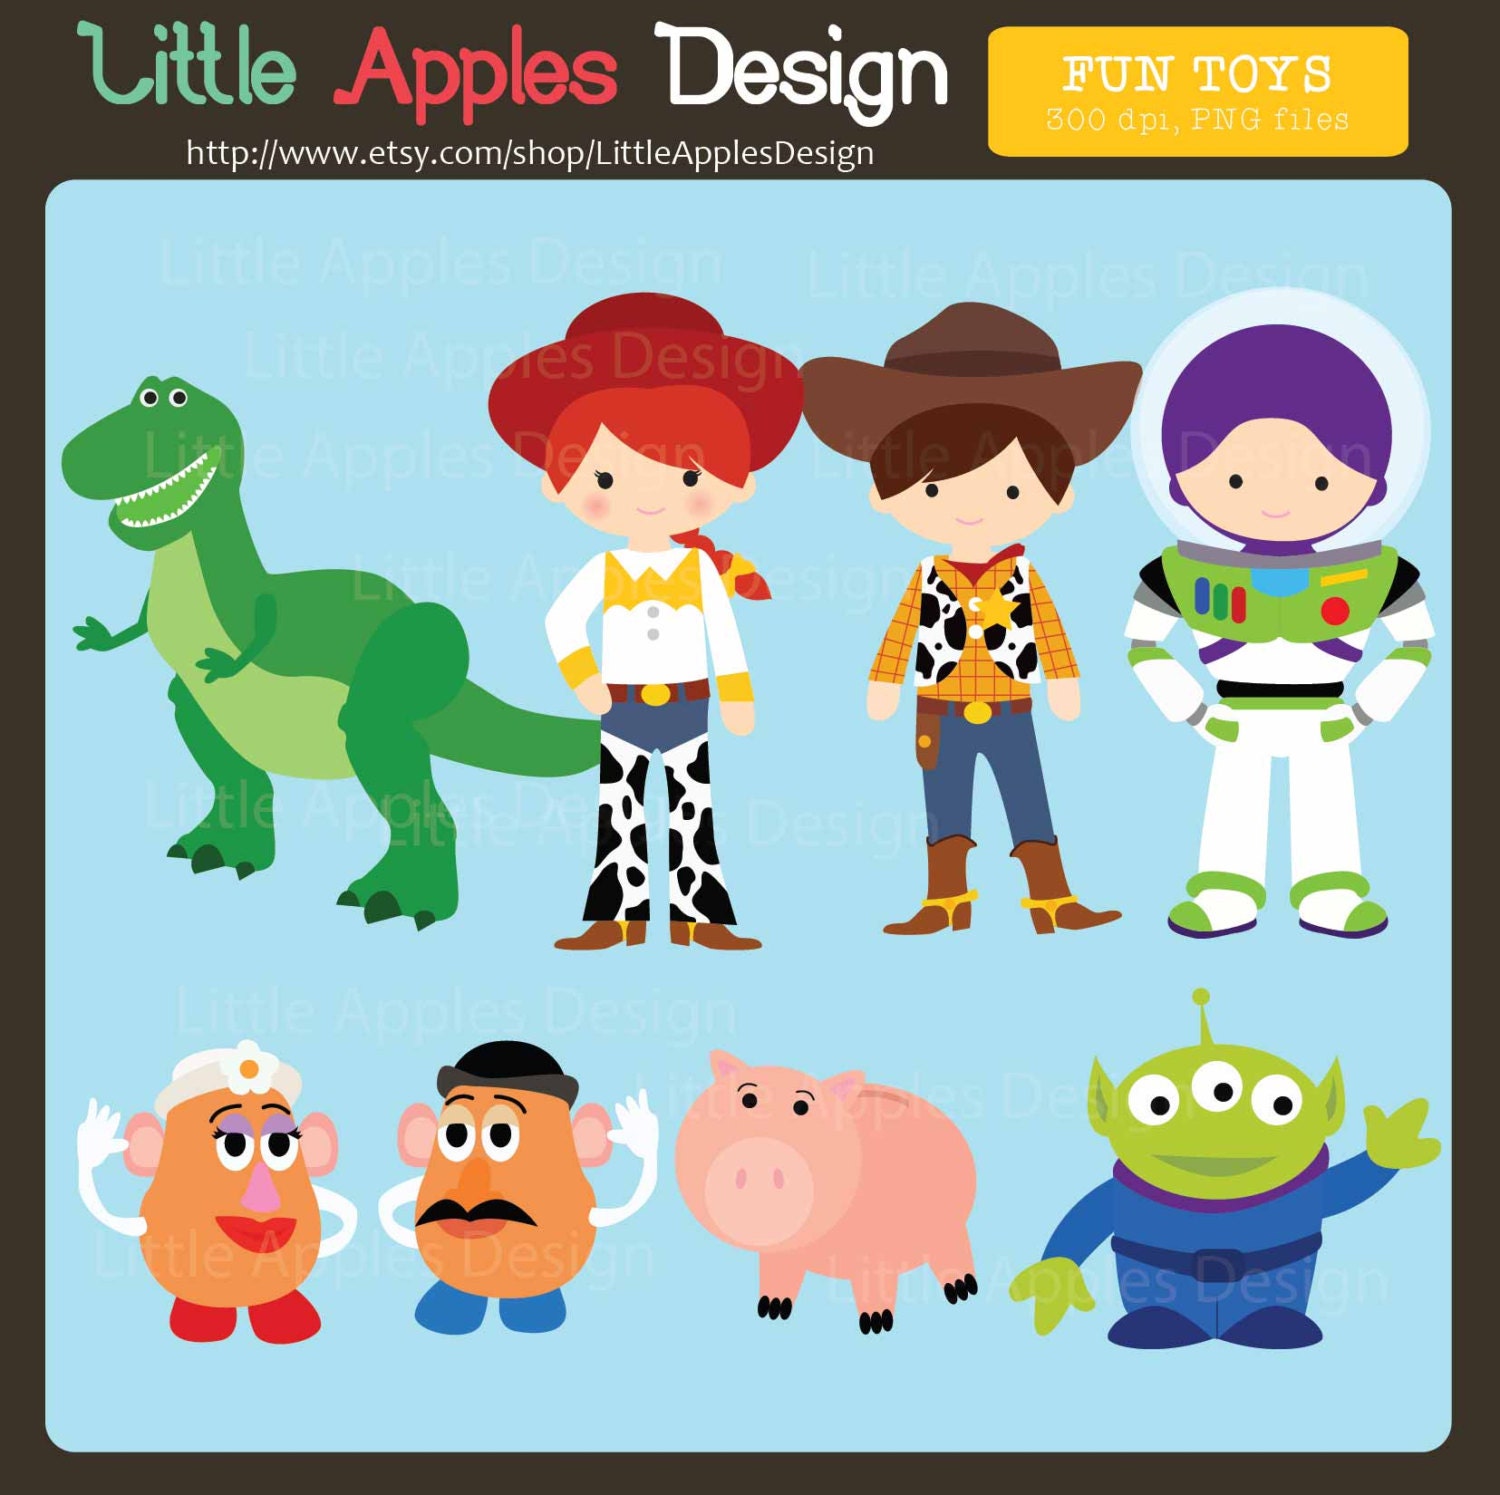 clipart of toys and games - photo #23